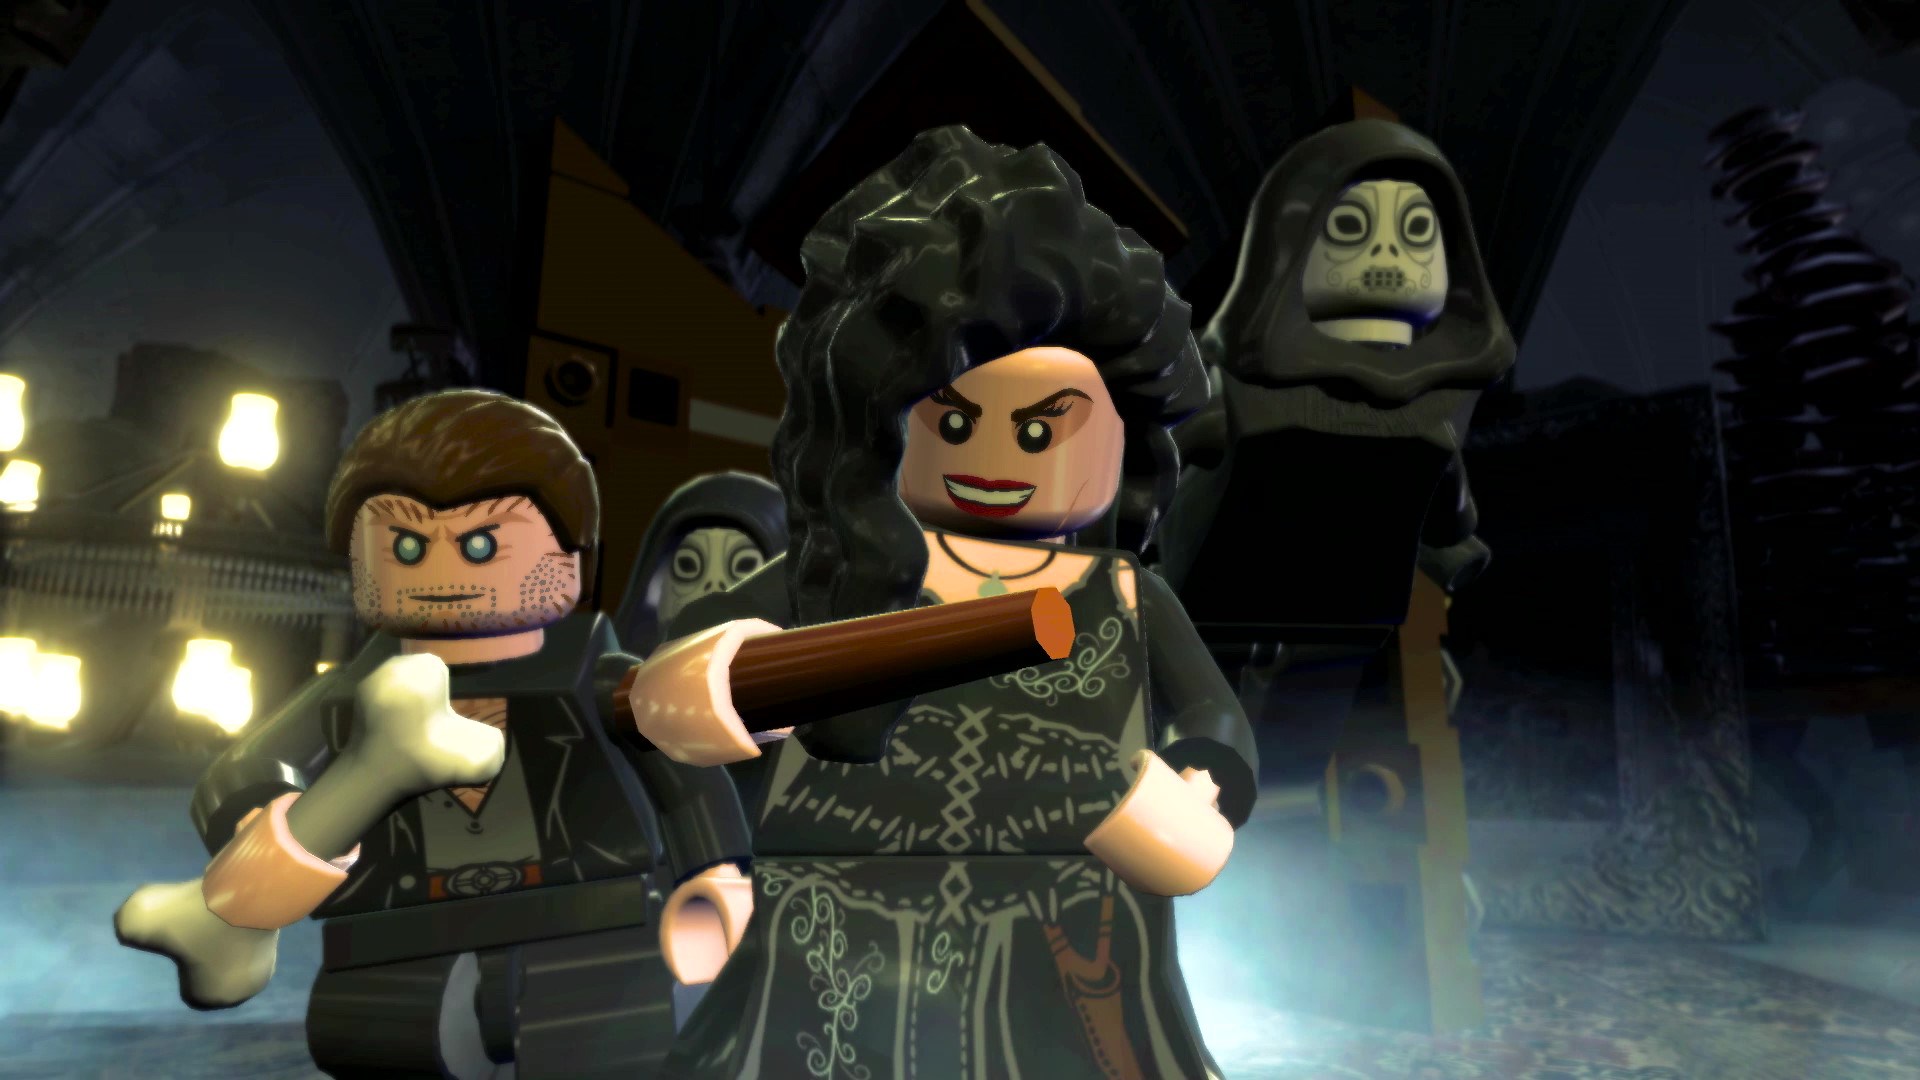 lego harry potter xbox one digital download